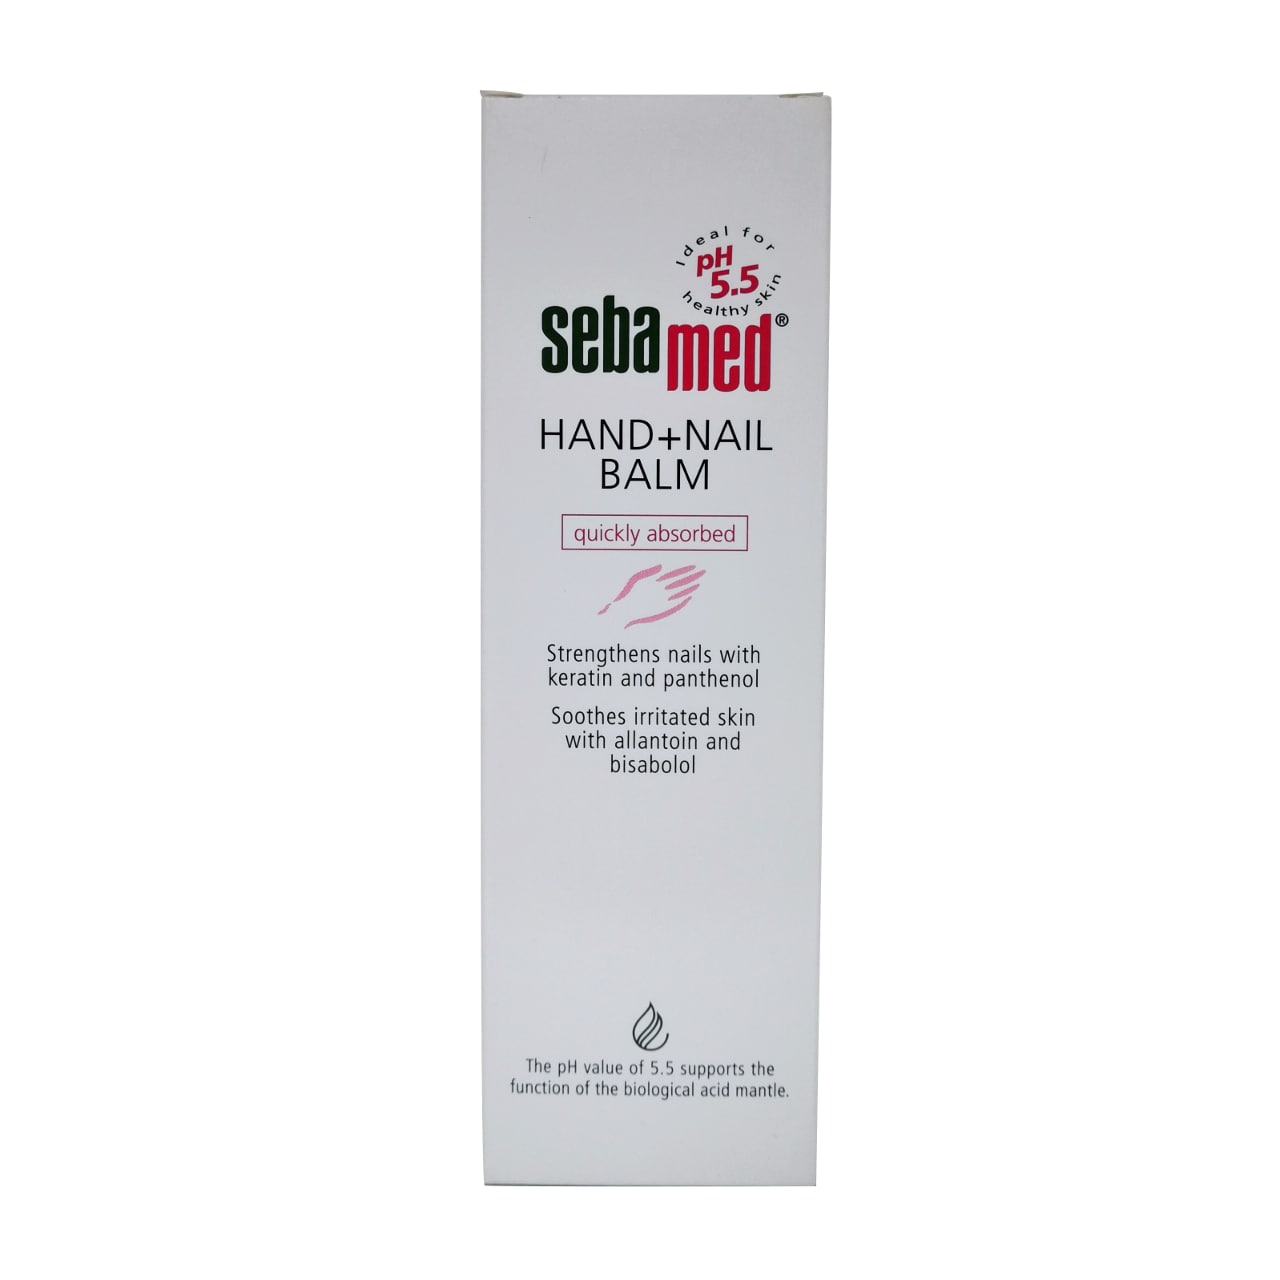 Product label for Sebamed Hand and Nail Balm